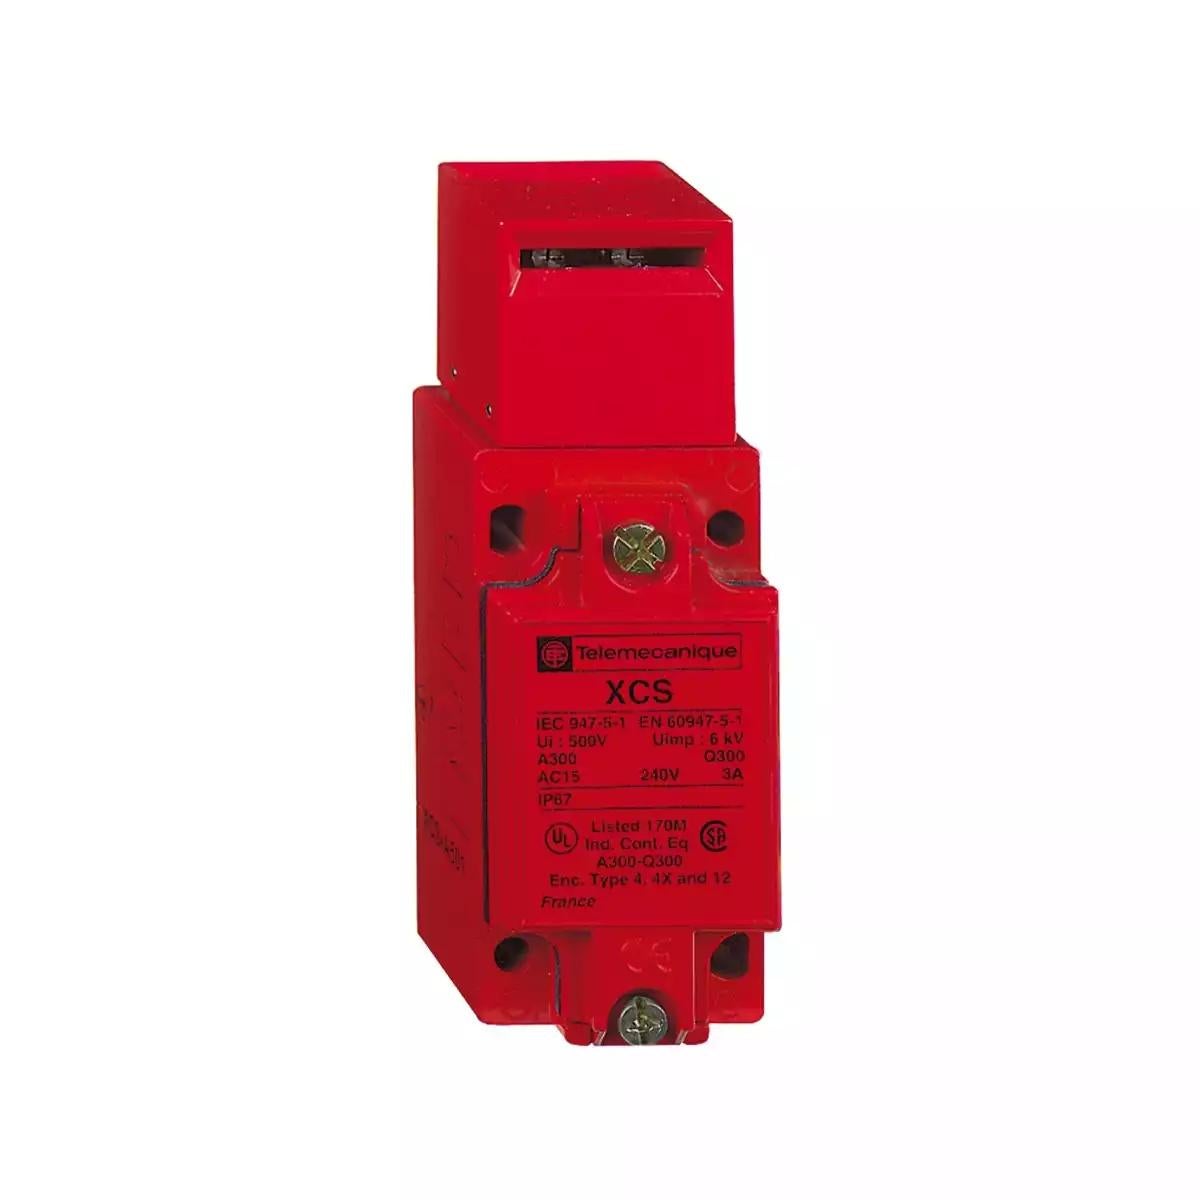 LIMIT SWITCH FOR SAFETY APPLICATION XCSA